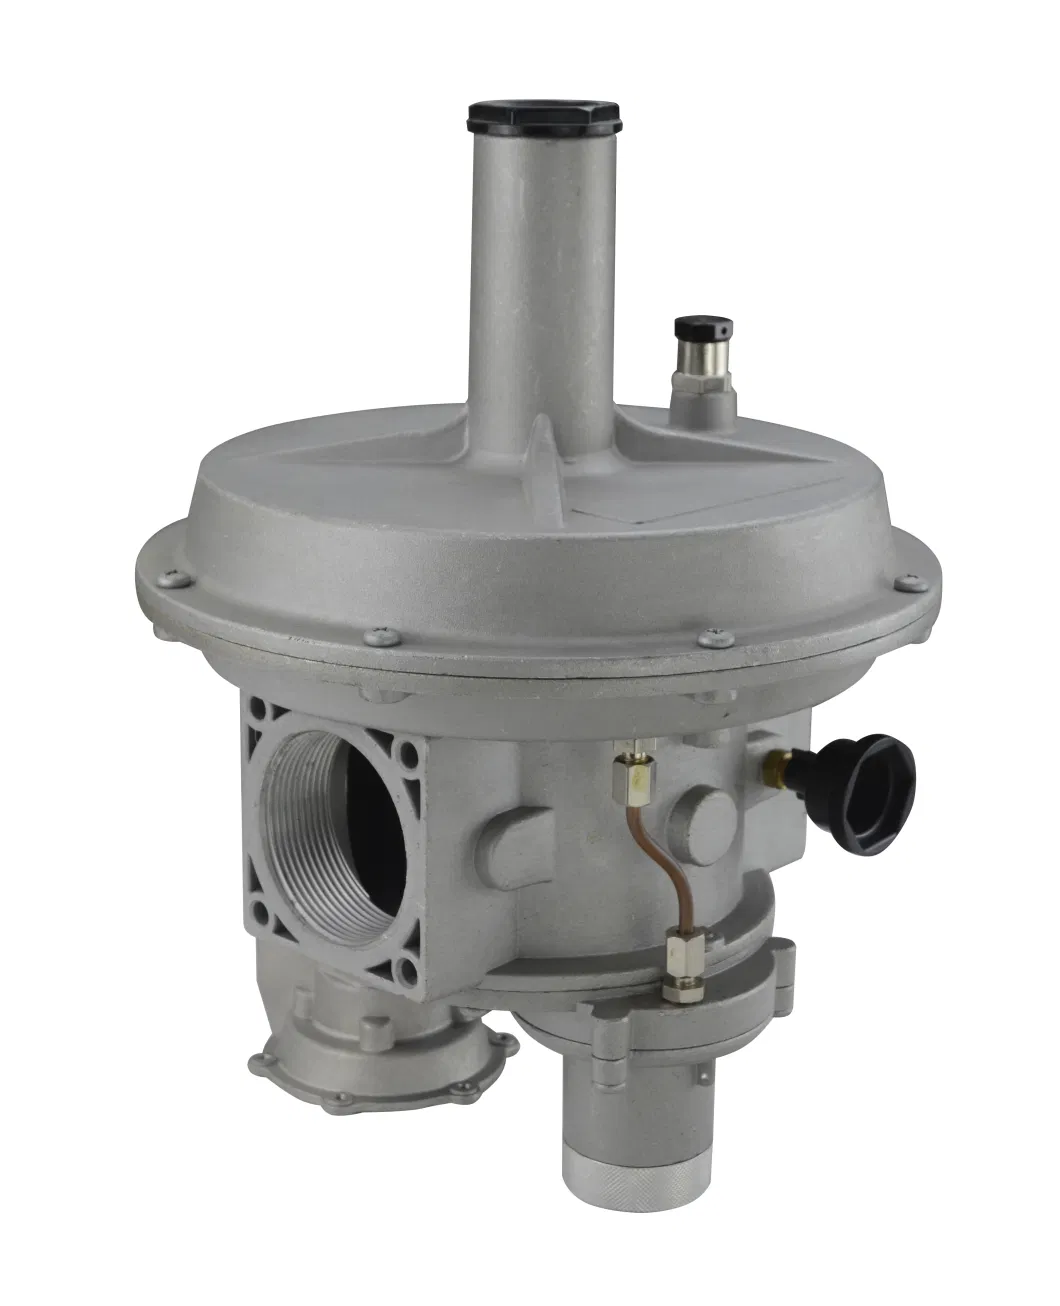 Gas Filter, Gas Regulator, Residential/Commercial Used